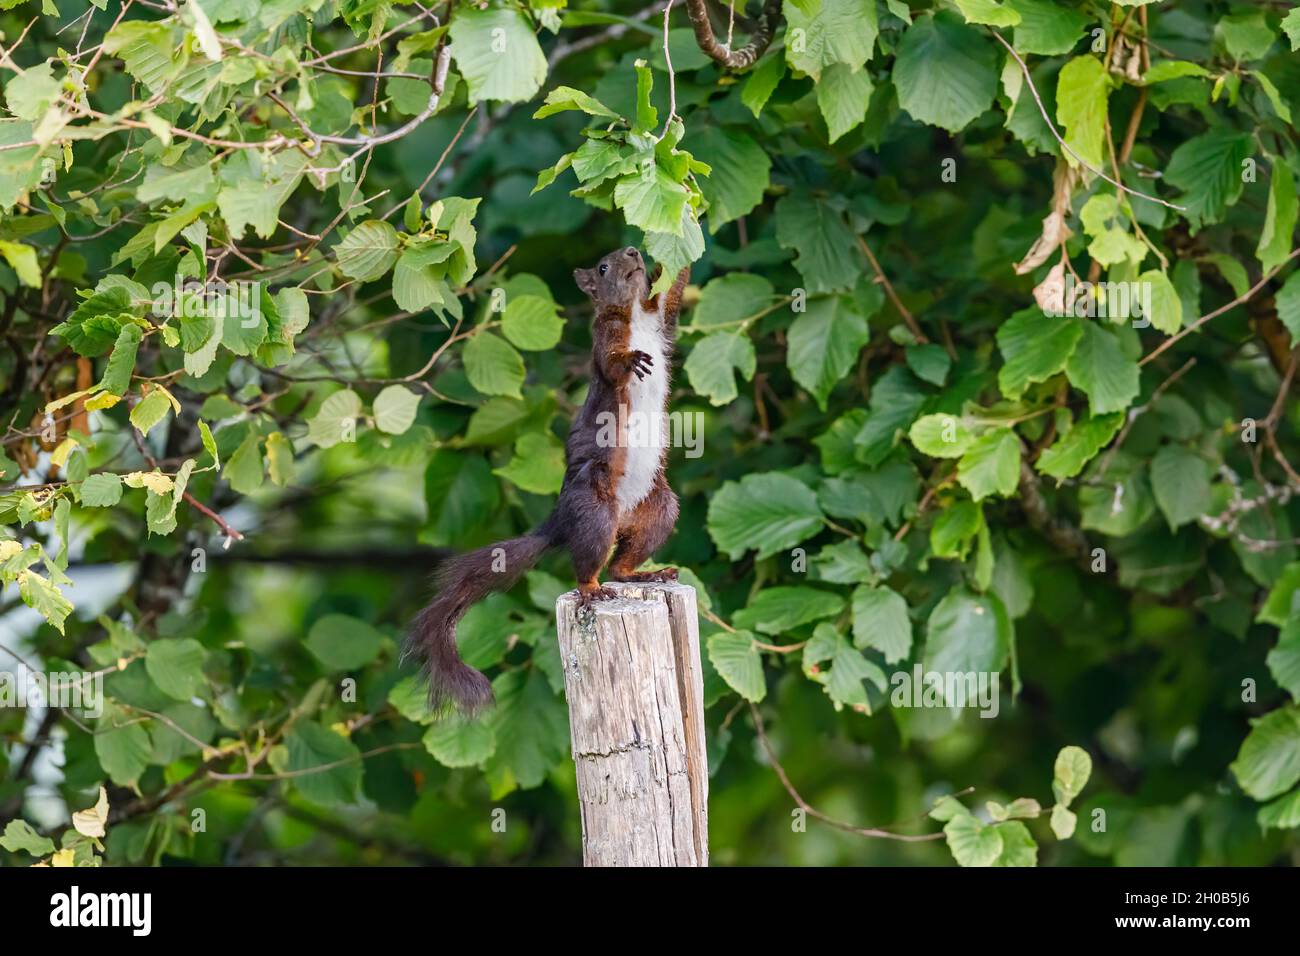 Red squirrel (Sciurus vulgaris) eating hazelnuts, standing on a pole, Alsace, France Stock Photo